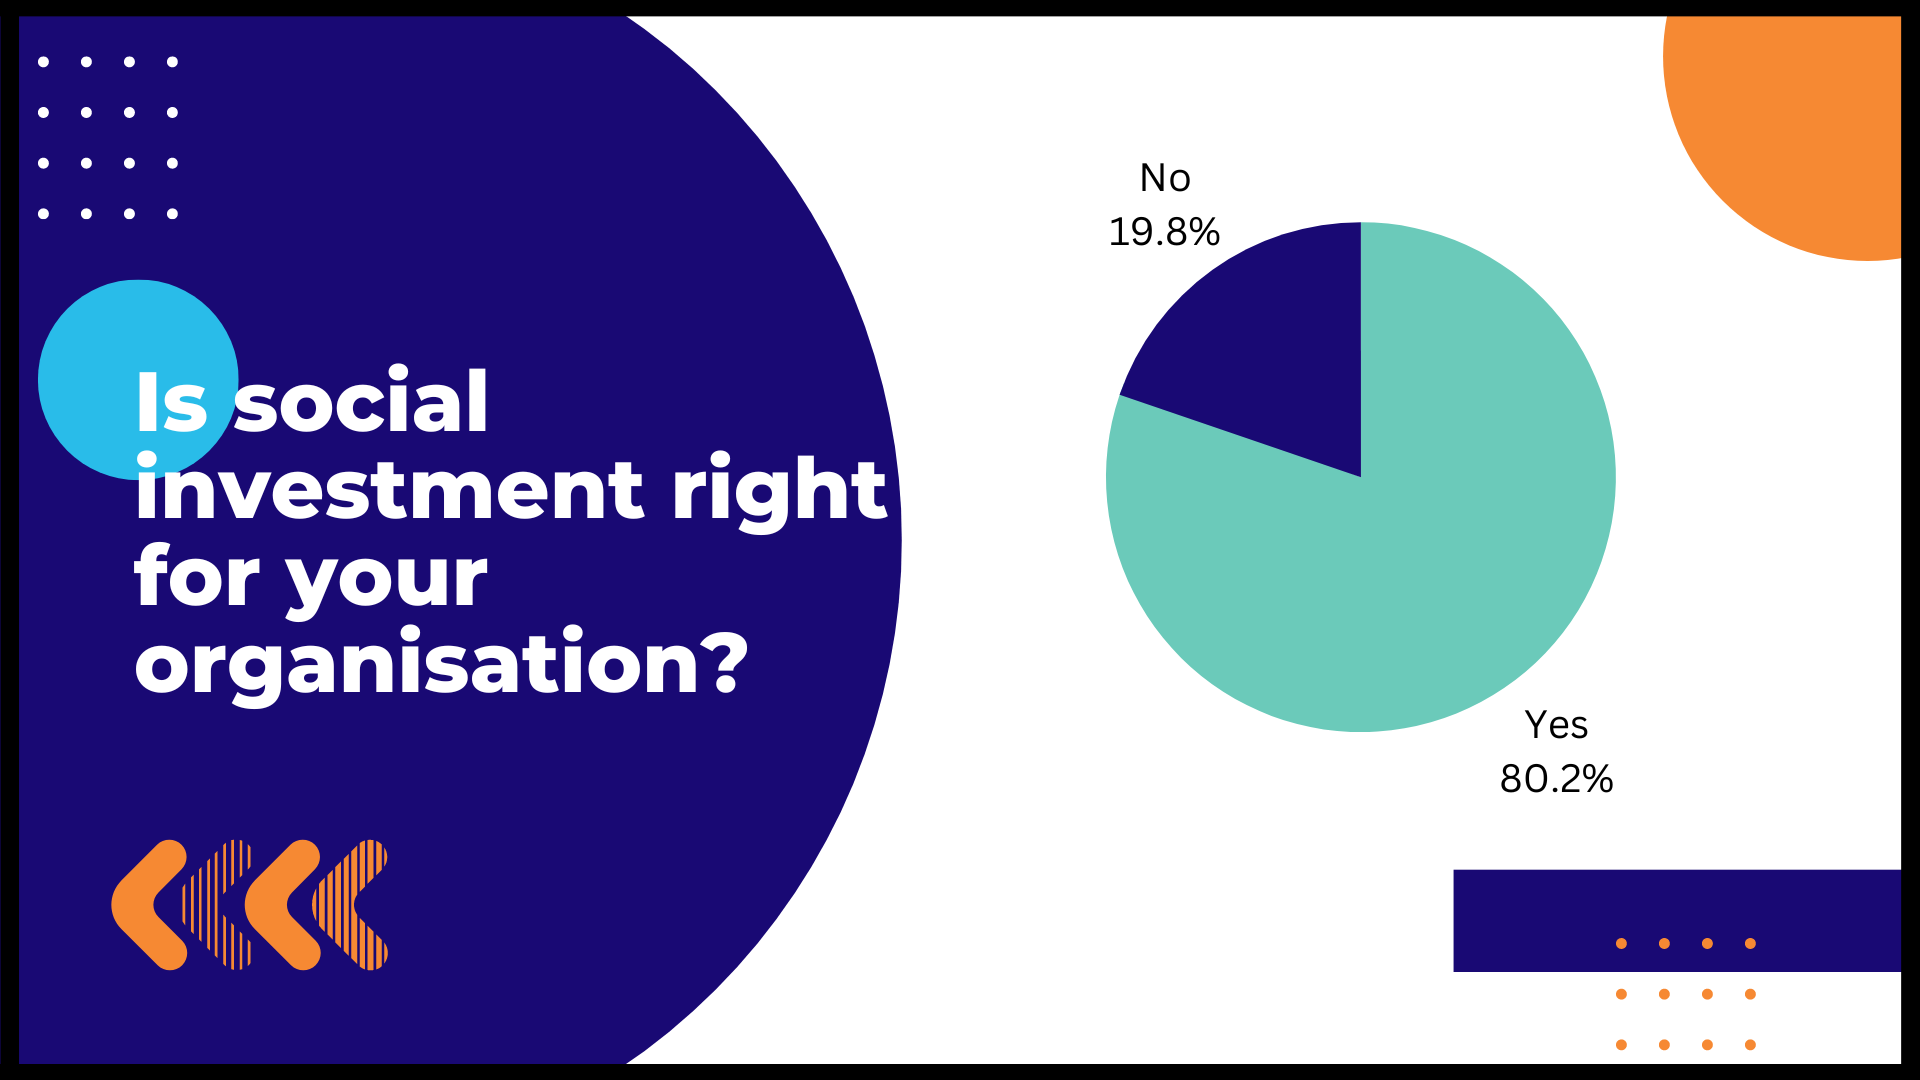 Is Social Investment right for your organisation? 80.2% yes 19.8% no